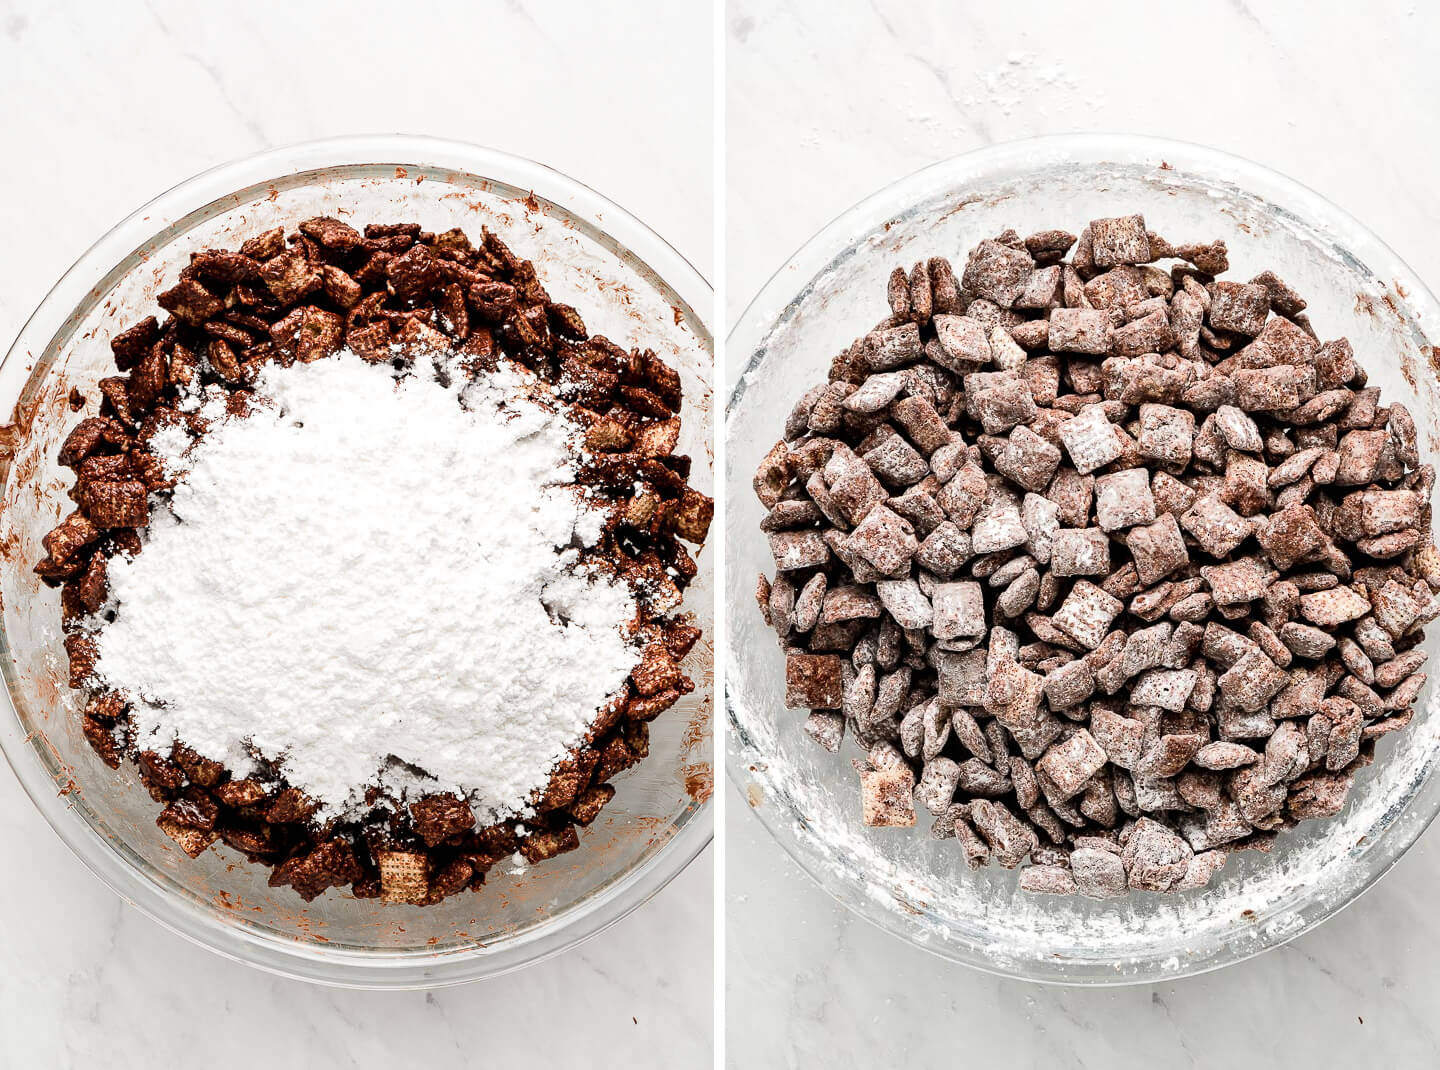 Diptych- Large mixing bowl with chocolate covered Chex topped with powdered sugar; all mixed and coated in sugar.